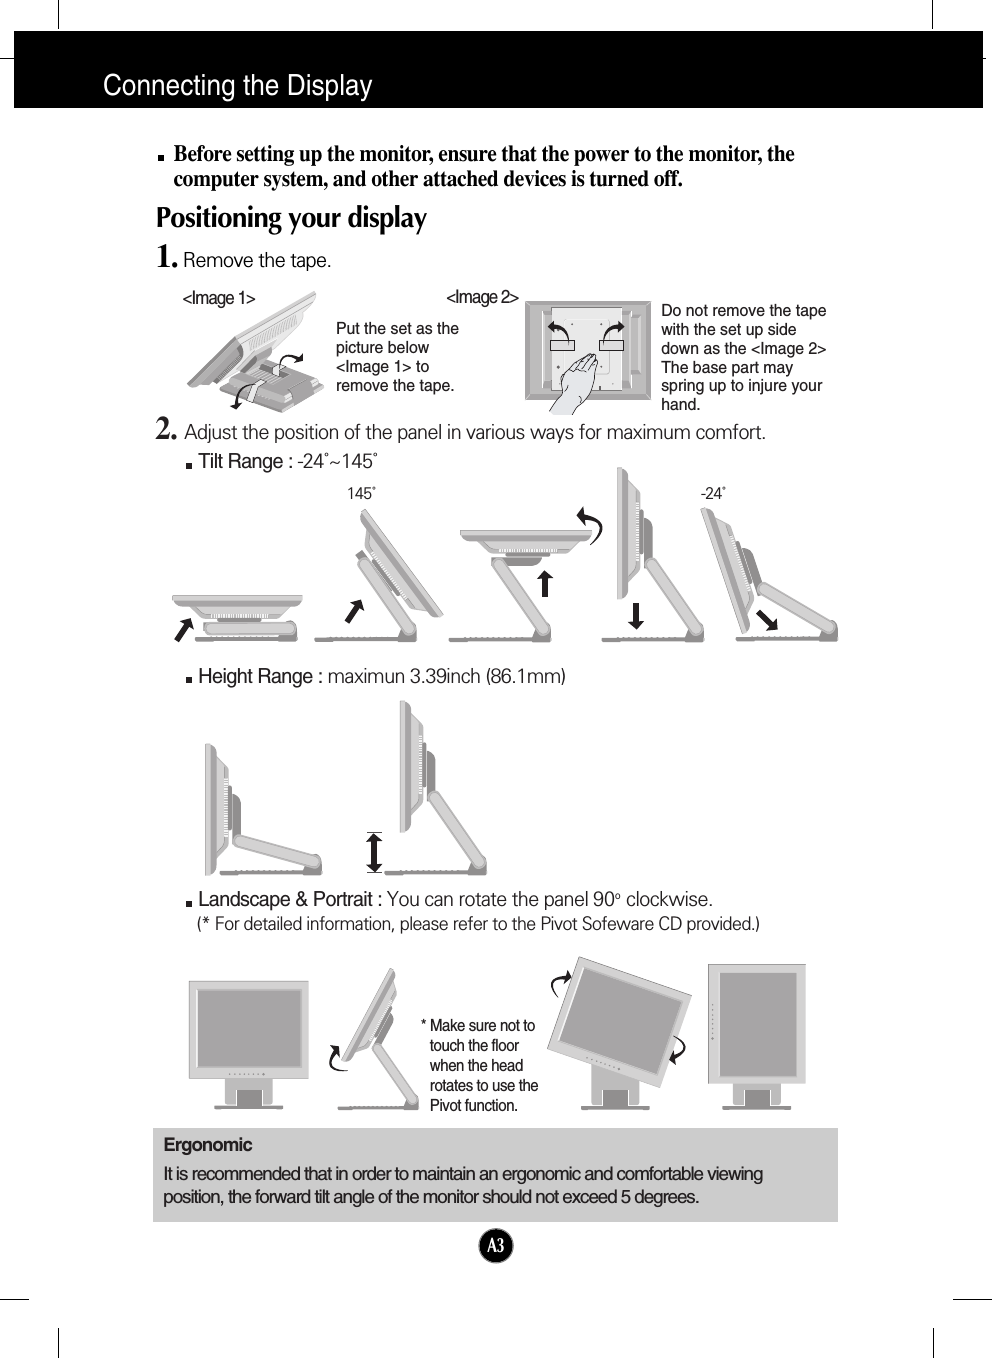 A3Connecting the DisplayBefore setting up the monitor, ensure that the power to the monitor, thecomputer system, and other attached devices is turned off. Positioning your display1. Remove the tape.ErgonomicIt is recommended that in order to maintain an ergonomic and comfortable viewingposition, the forward tilt angle of the monitor should not exceed 5 degrees.Height Range : maximun 3.39inch (86.1mm)Landscape &amp; Portrait : You can rotate the panel 90o  clockwise. (* For detailed information, please refer to the Pivot Sofeware CD provided.)2. Adjust the position of the panel in various ways for maximum comfort.Tilt Range : -24˚~145˚145˚ -24˚* Make sure not totouch the floorwhen the headrotates to use thePivot function.&lt;Image 1&gt;Put the set as thepicture below&lt;Image 1&gt; toremove the tape. Do not remove the tapewith the set up sidedown as the &lt;Image 2&gt;The base part mayspring up to injure yourhand. &lt;Image 2&gt;